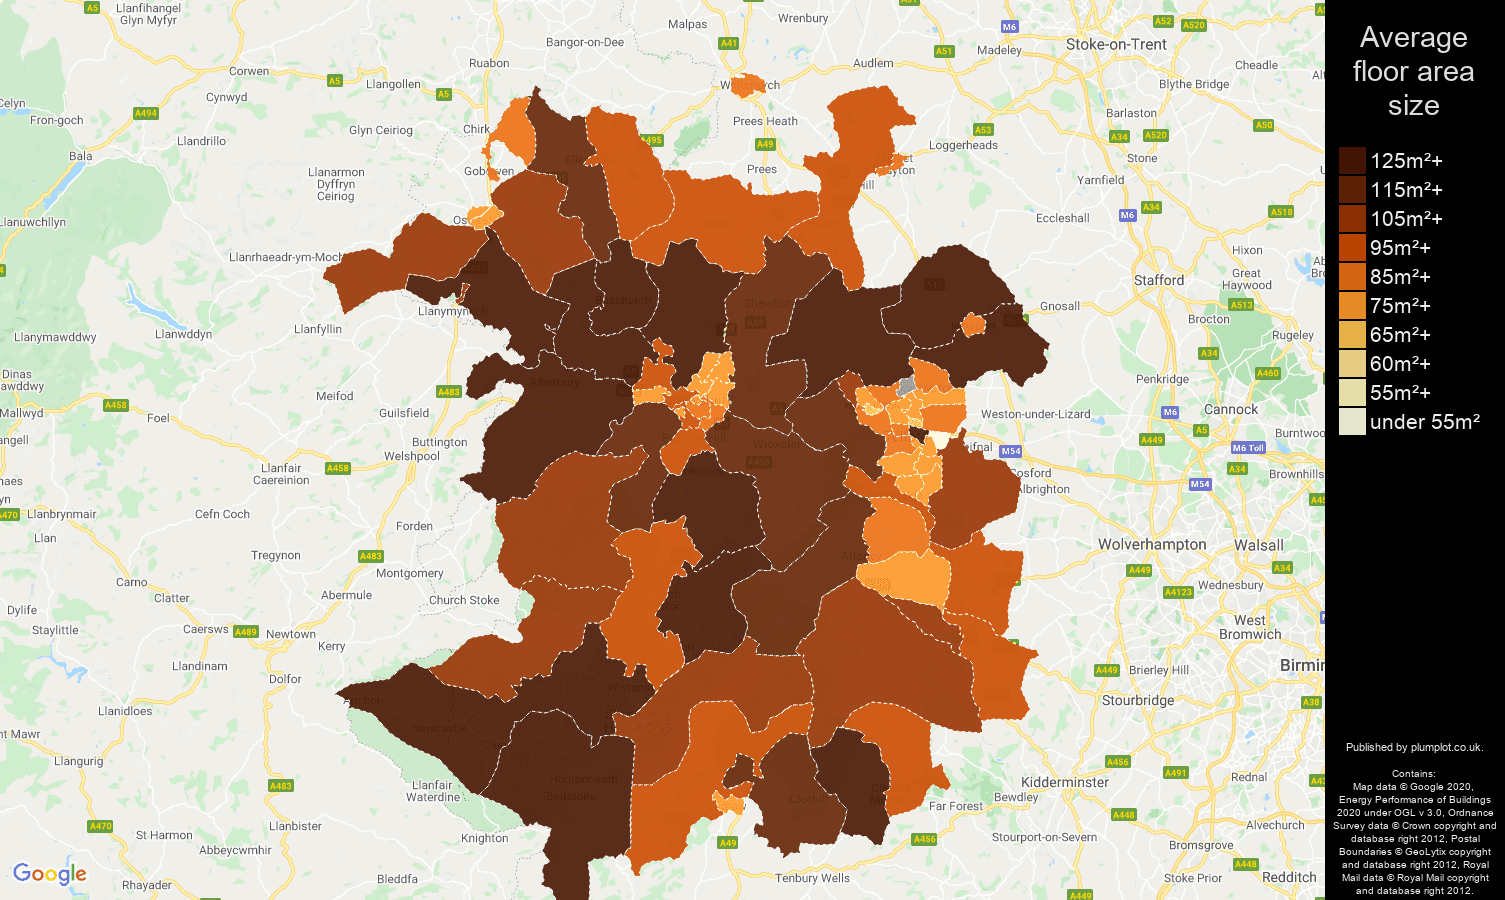 Shropshire map of average floor area size of properties